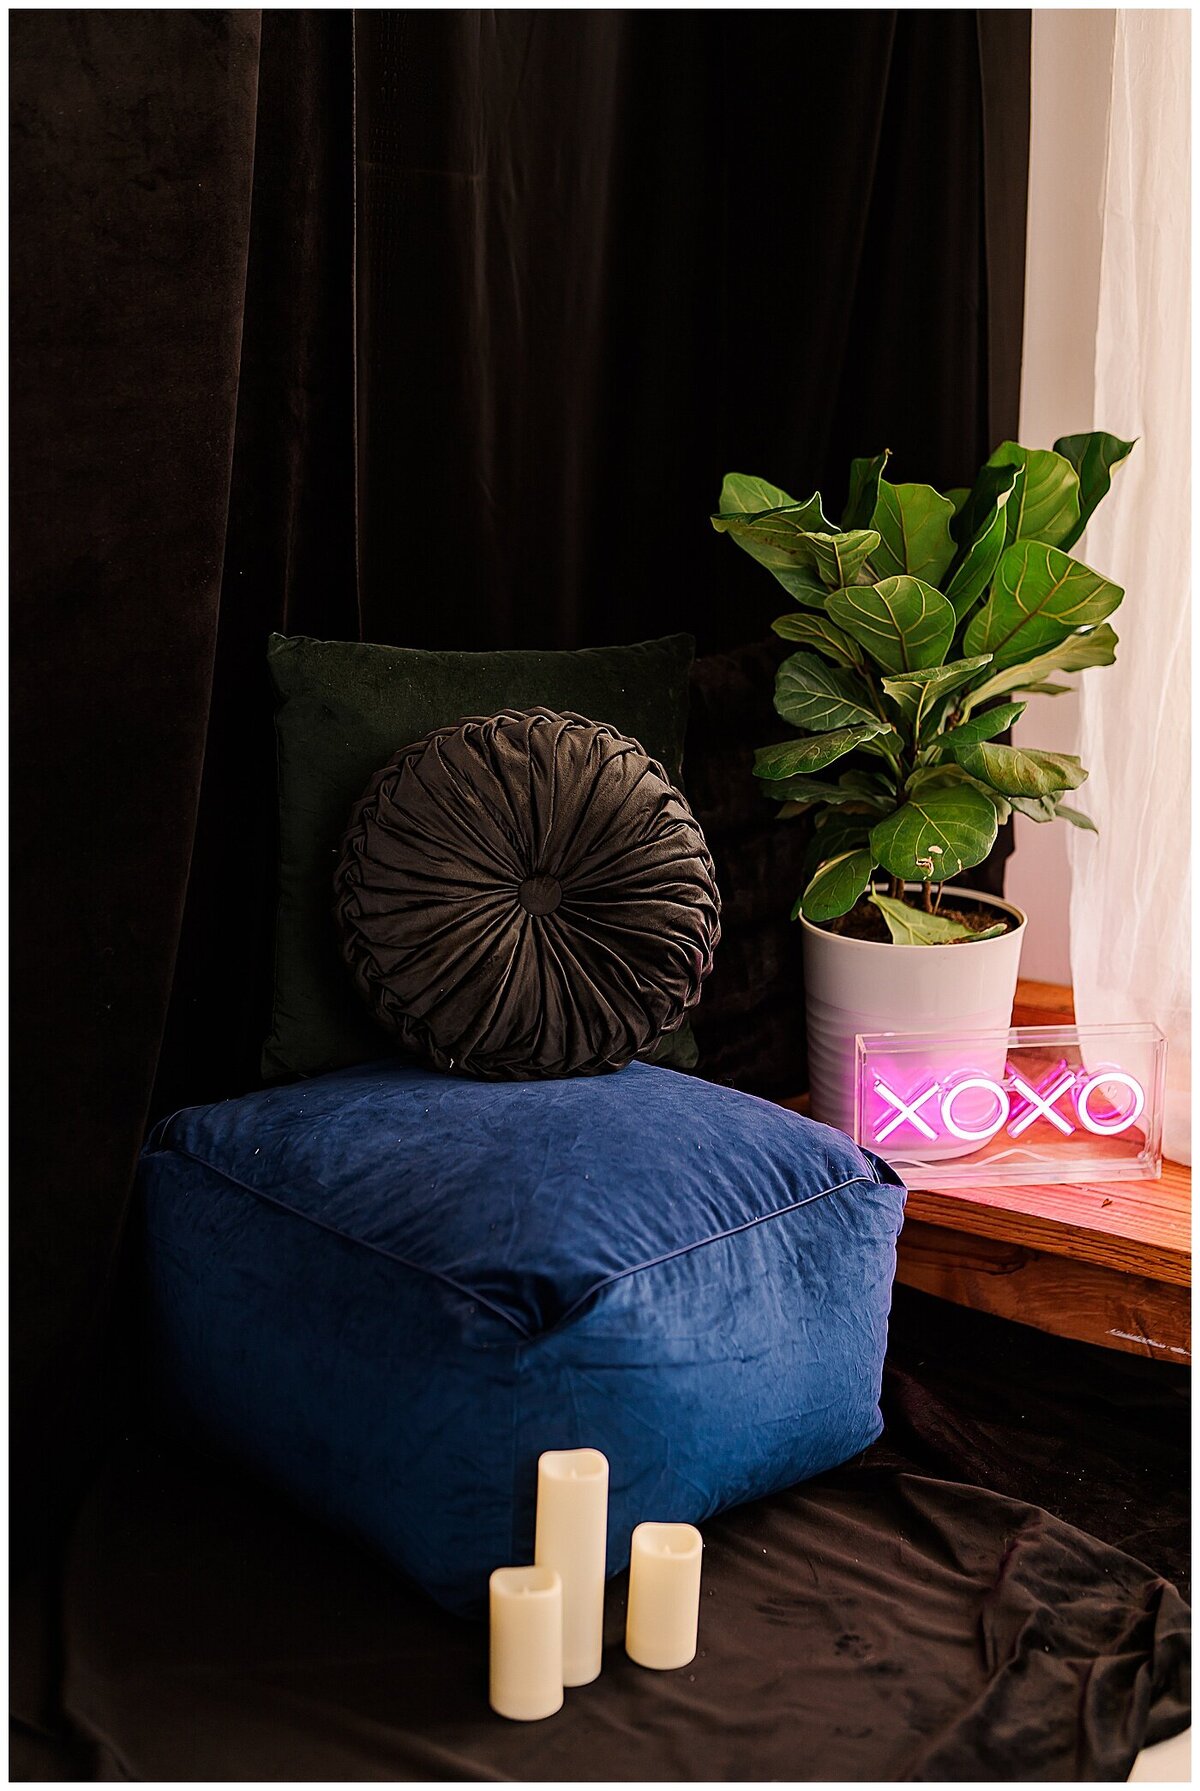 Dark and gemtoned photography studio scene with neon sign and candles